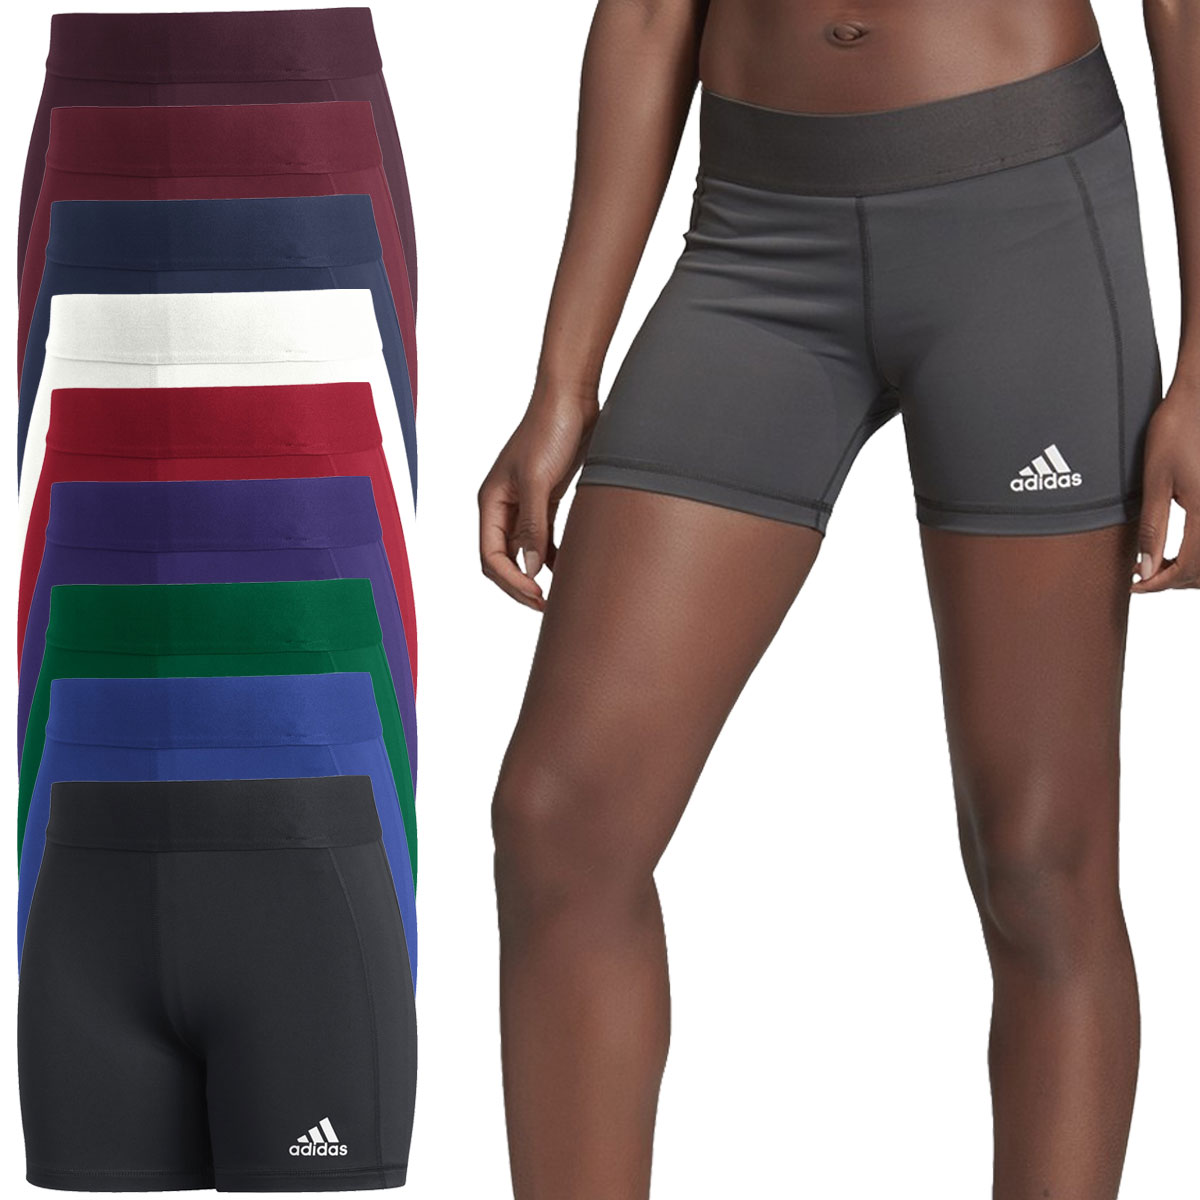 adidas Women's 4-Inch Compression Fit Quarter Length Volleyball